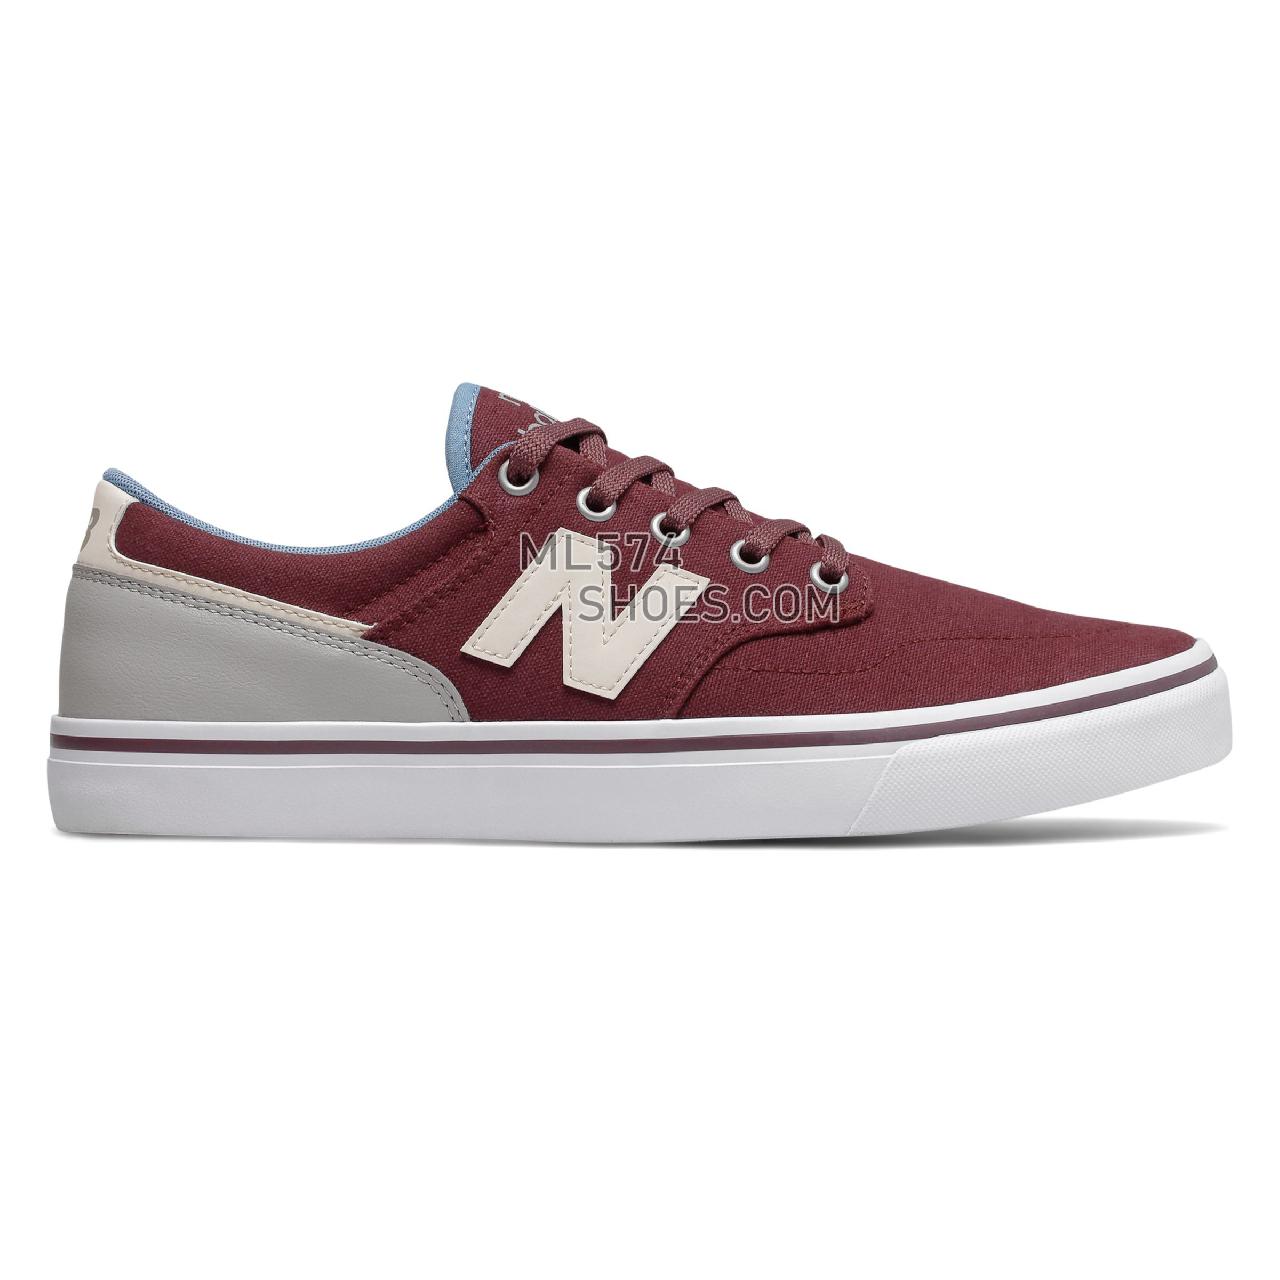 New Balance All Coasts 331 - Men's Court Classics - Burgundy with Light Grey and White - AM331BTG